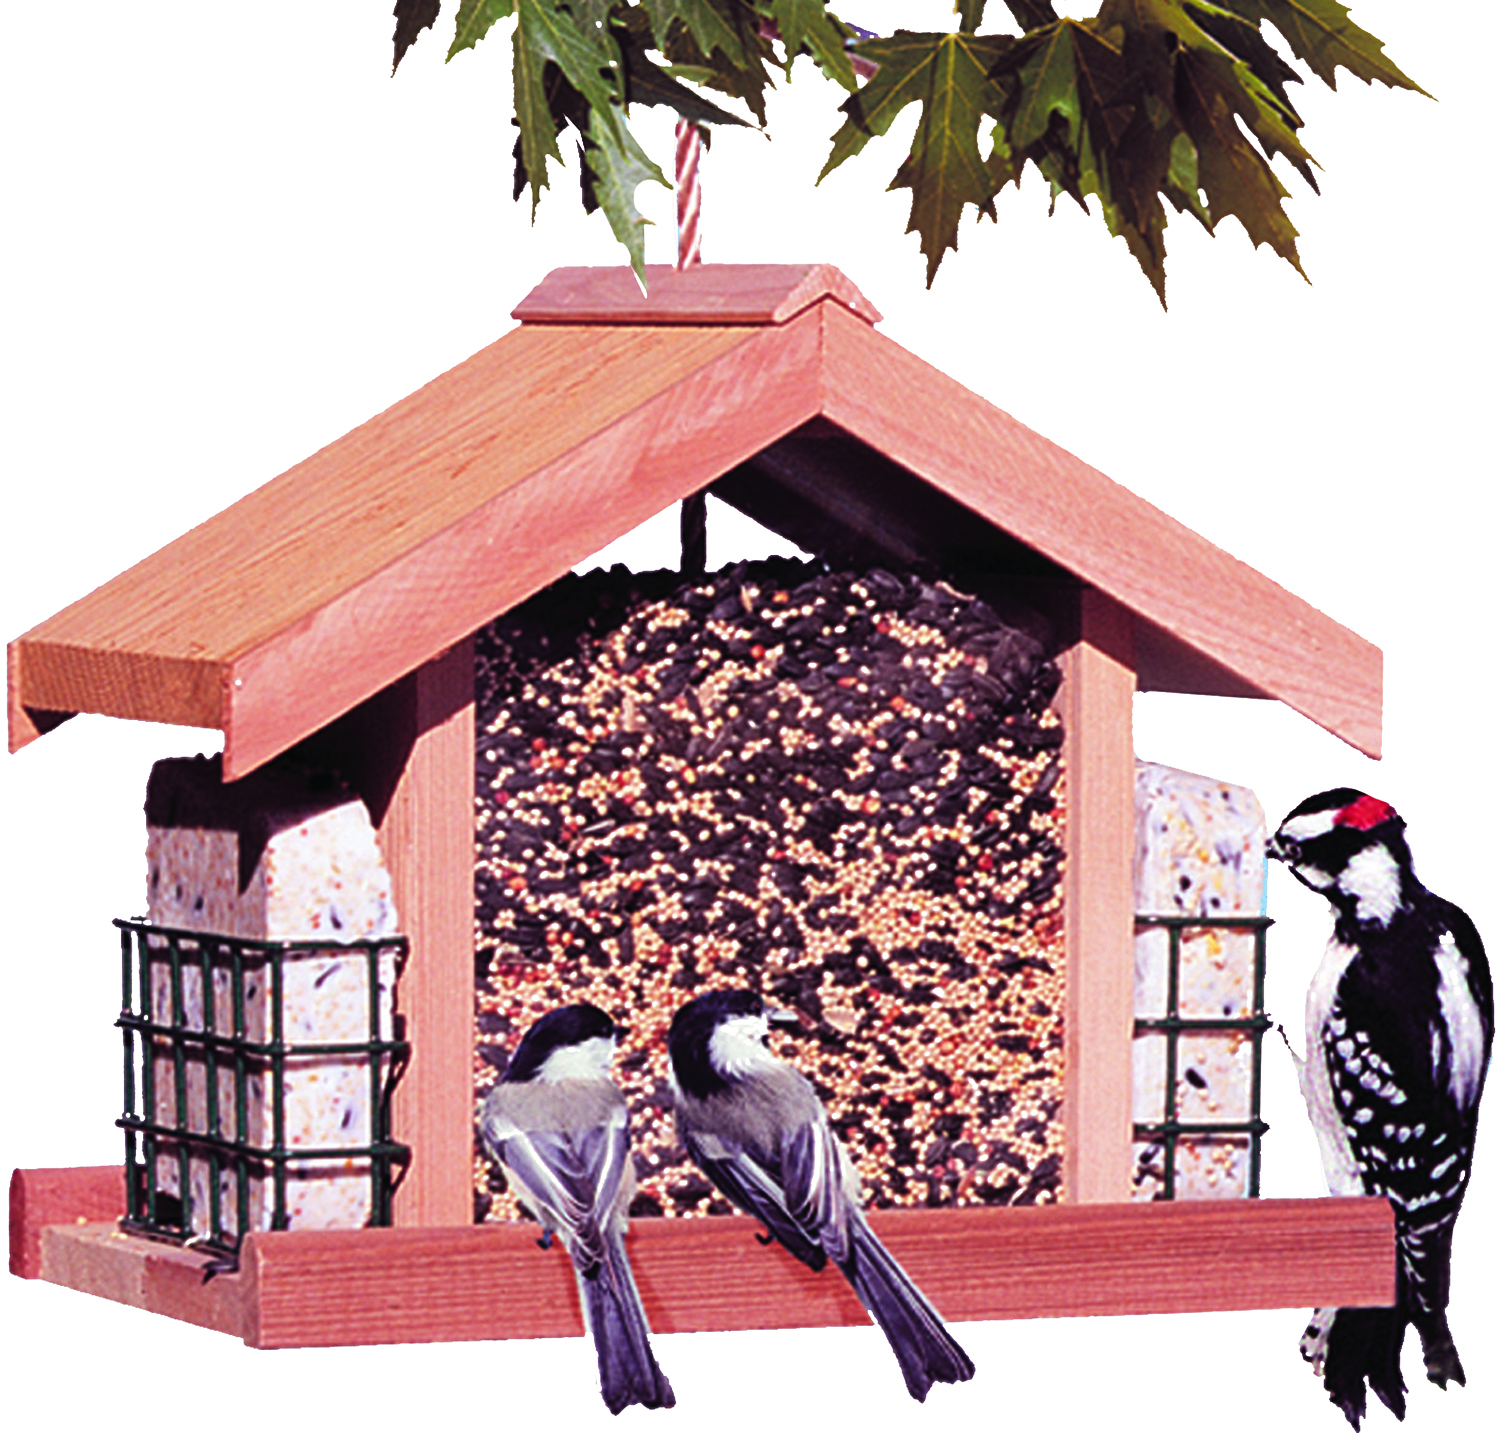 Deluxe Chalet Feeder with Suet